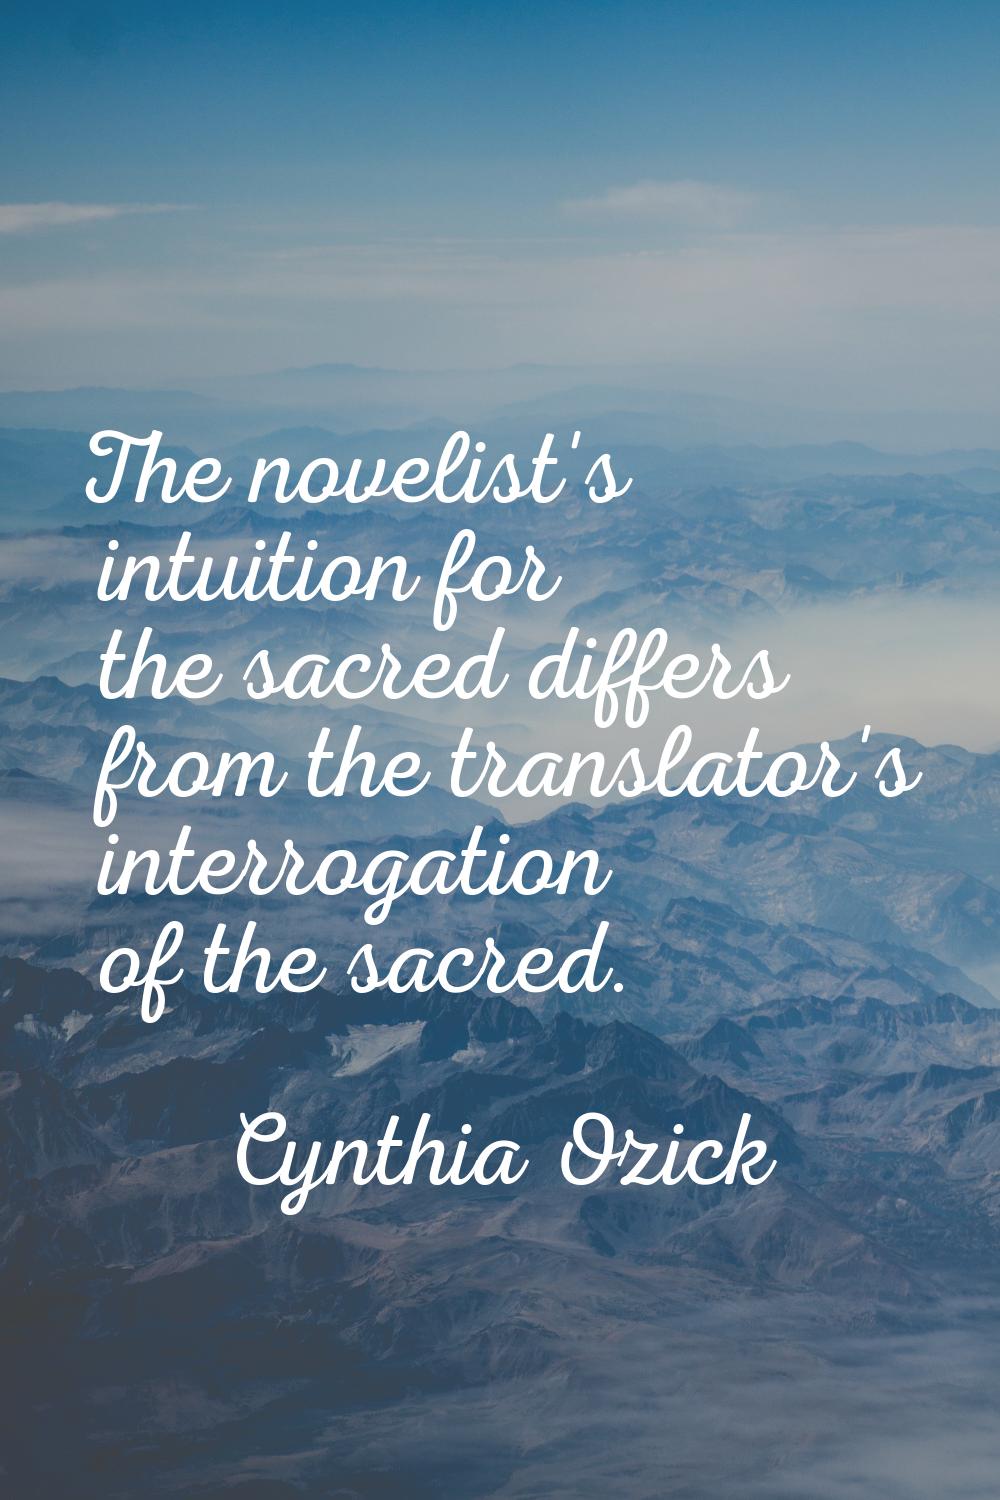 The novelist's intuition for the sacred differs from the translator's interrogation of the sacred.